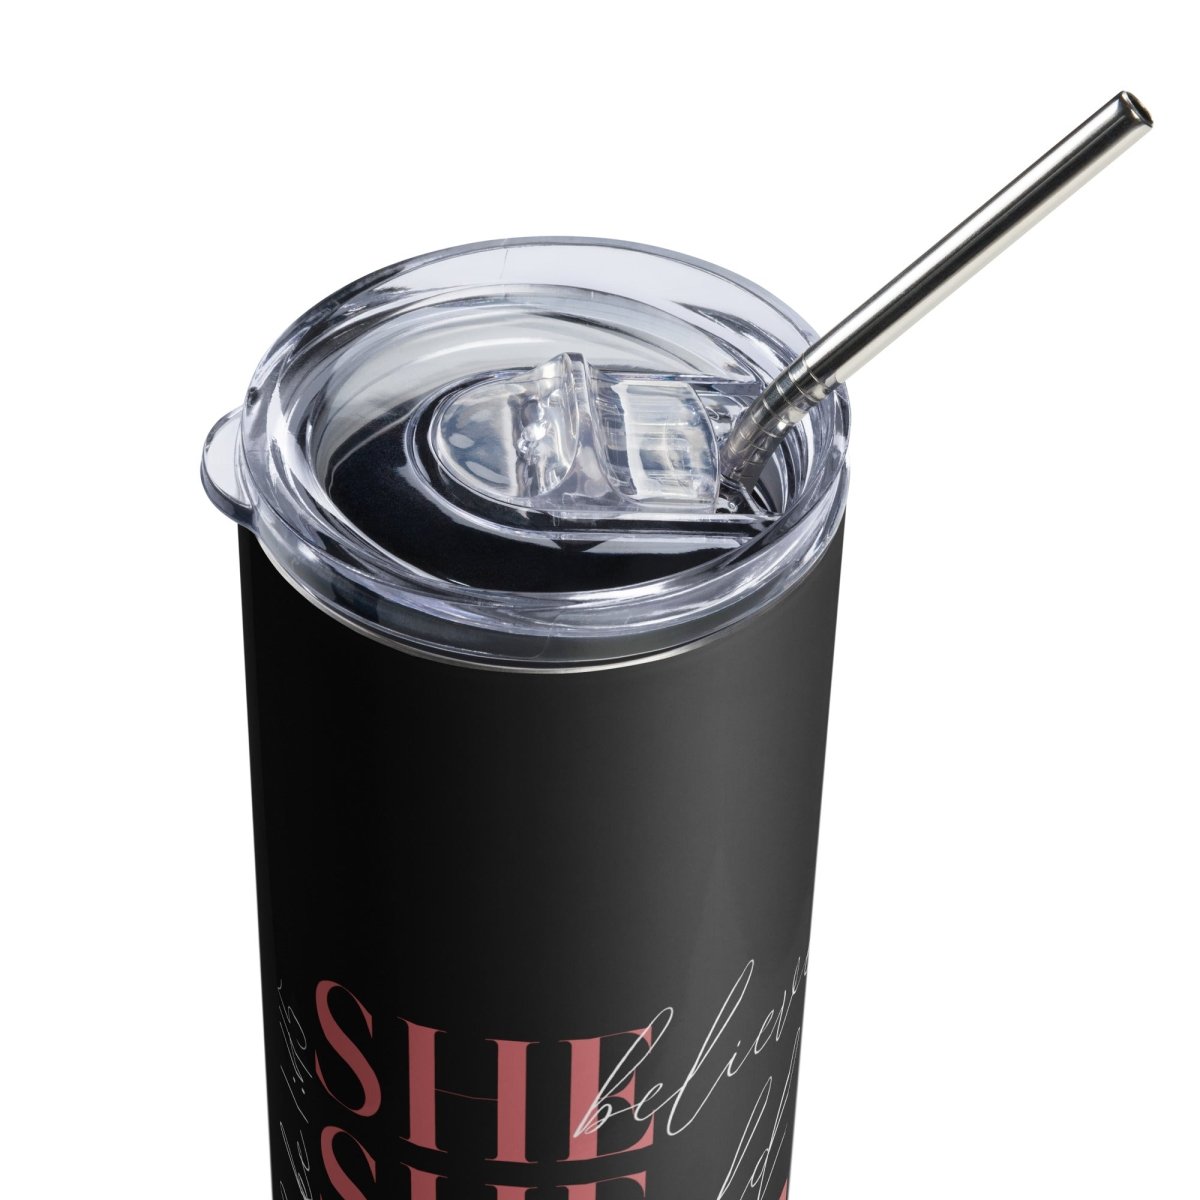 She Believed stainless steel tumbler - Vision Apparel Inc.